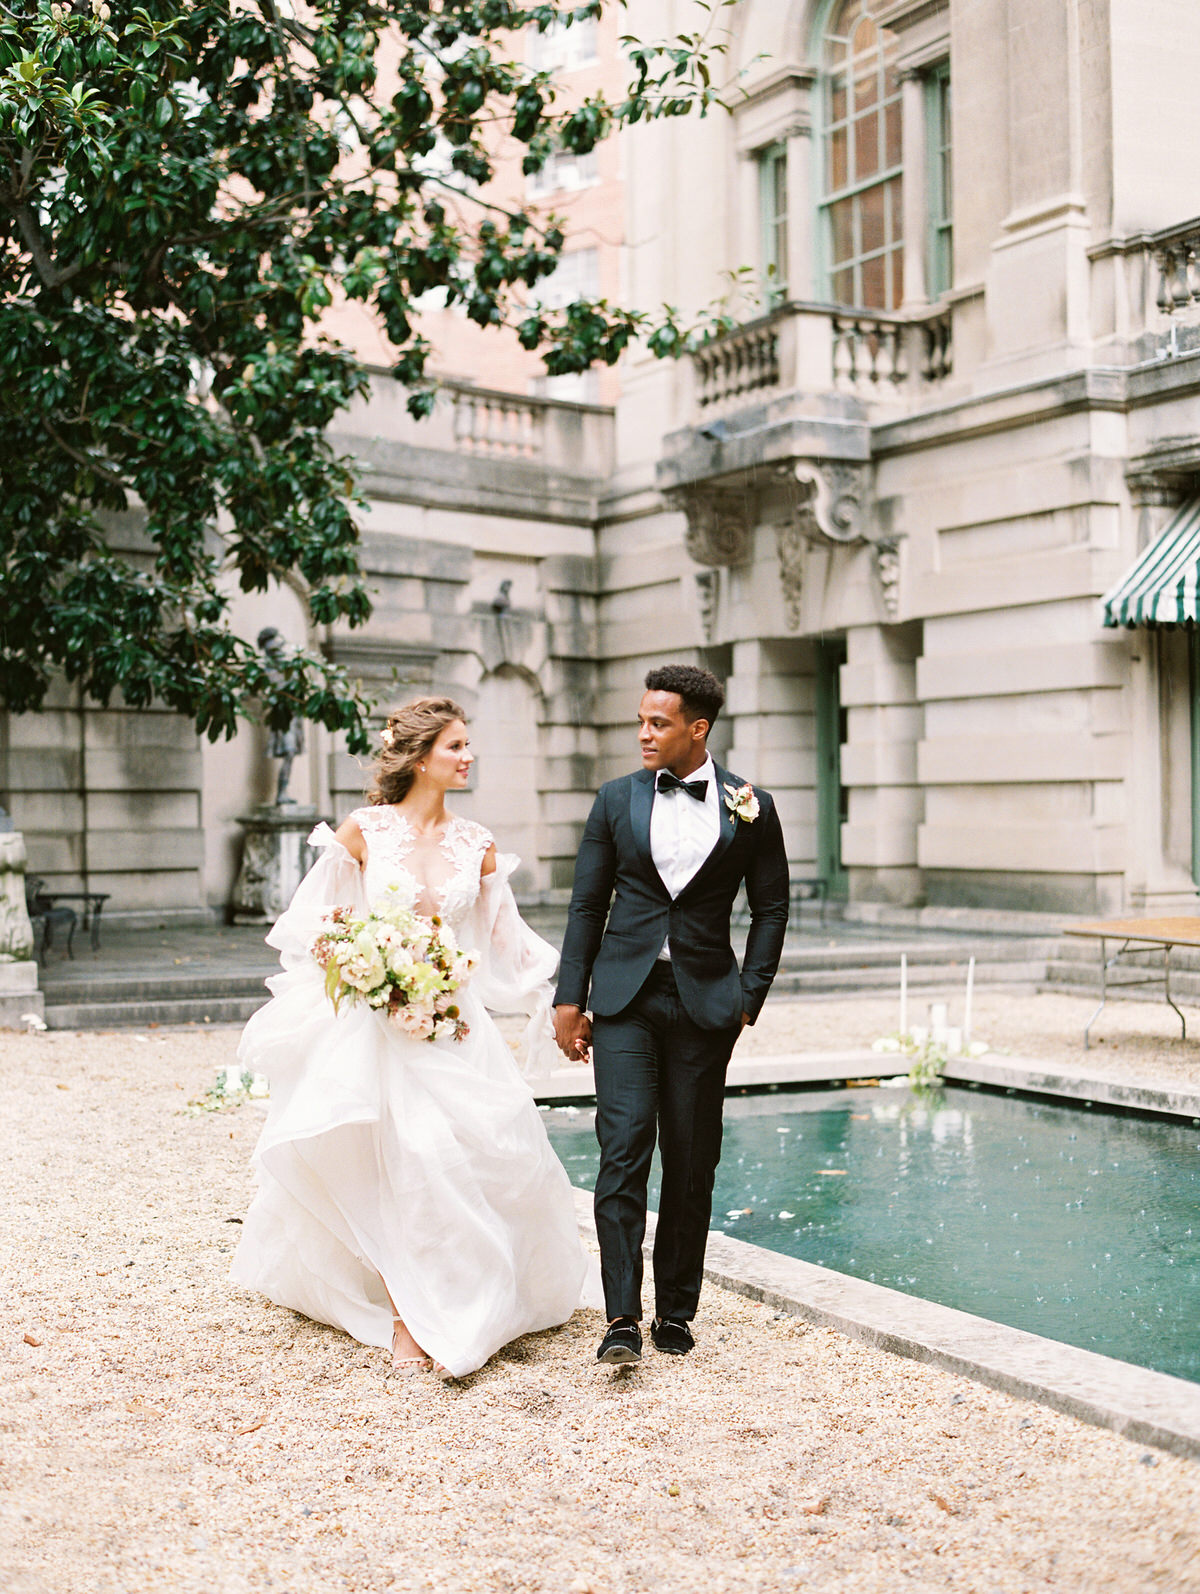 Creative wedding florals for an elegant wedding at The Anderson House in Washington DC, photographed by a DC film wedding photographer.